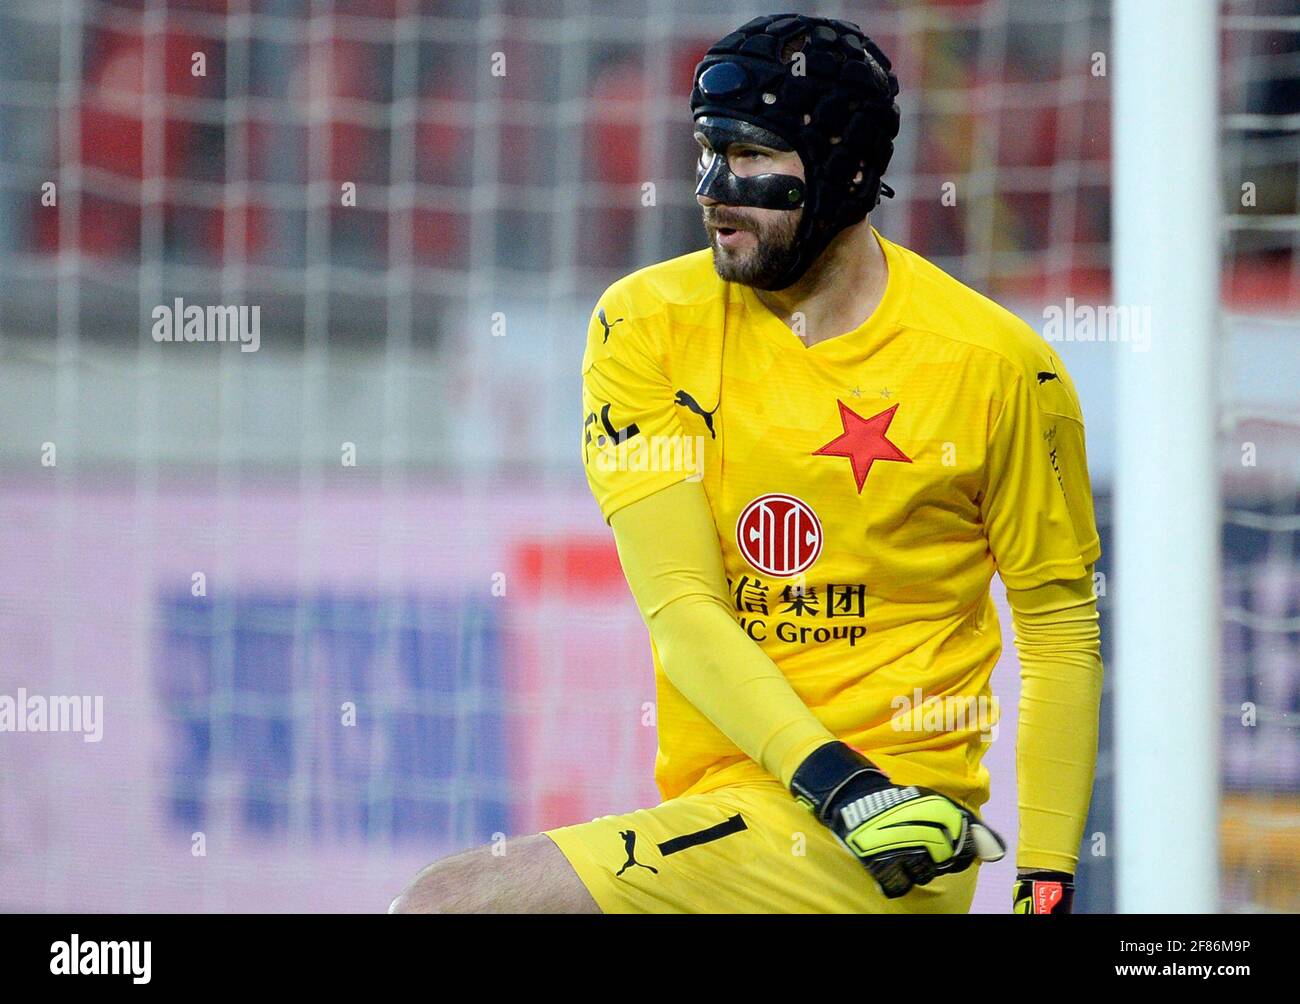 Prague, Czech Republic. 11th Apr, 2021. Goalkeeper Ondrej Kolar (Slavia) in action during 26th round of Czech First League, match SK Slavia Praha vs AC Sparta Praha, on April 11, 2021, in Prague, Czech Republic. Kolar wears a protective helmet and mask after the injury from March 18, 2021. Credit: Katerina Sulova/CTK Photo/Alamy Live News Stock Photo